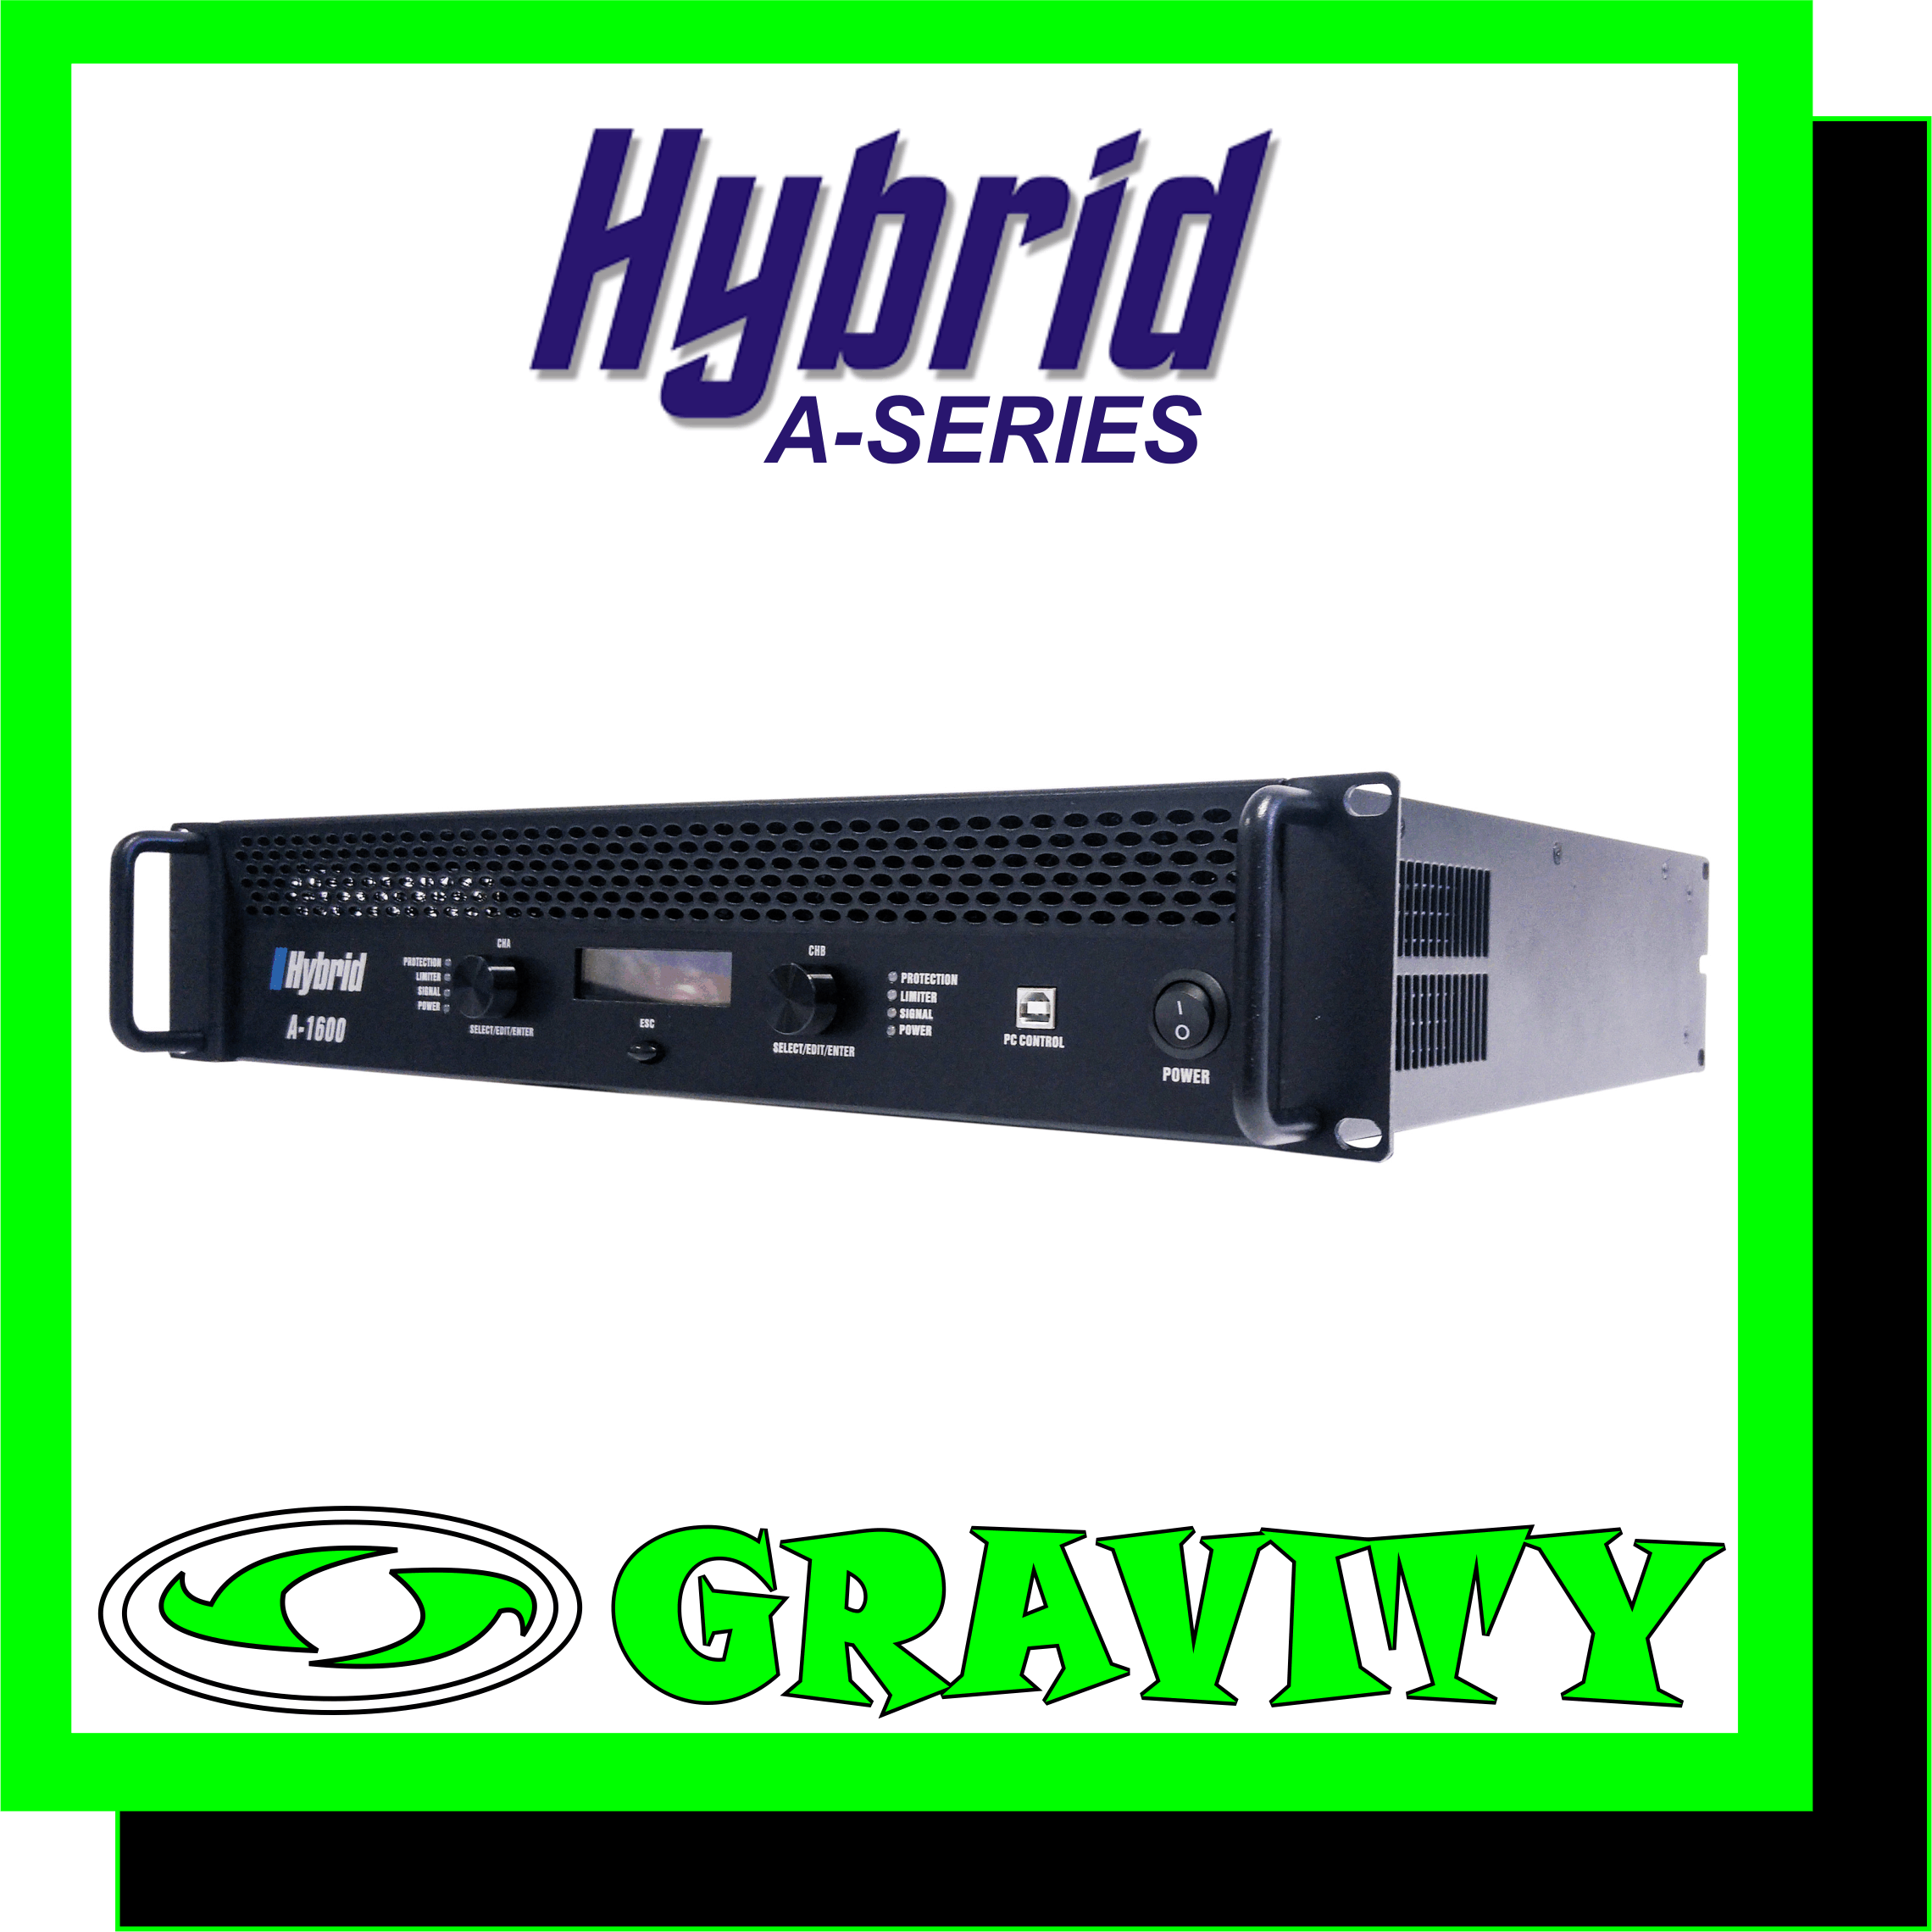 Hybrid A1600 MK5 Power Amplifier with DSP  8Ohm Stereo Power, RMS/CH 450W 4Ohm Stereo Power, RMS/CH 700W 2Ohm Stereo Power, RMS/CH 750W 8Ohm Bridged Mono Power, RMS 1400W 4Ohm Bridged Mono Power, RMS 1500W  Frequency Response (+/- 3dB, 1W/8O)	20Hz – 20KHz +/- 3dB Protection DC Protection, Short Circuit Protection, Thermal Protection, Inrush Current Protection, Soft Start Portection, Input & Overload Protection  THD+N (20Hz-20KHz)  <0.5% Damping Factor (1KHz @ 8O) >300 Hum & Noise(“A” weighted, -80dBW) 95dB Input Impedance (Balanced / Unbalanced)	20K Ohm / 10K Ohm Crosstalk (20Hz-20KHz Rated Power 8O) >60dB Cooling	2 x Fans, Dual speed, Front to Rear Airflow  Input Connectors - Jack/Female XLR Neutrik Combo + Male XLR Neutrik Output Connectors - Neutrik Speakon + Binding Post  Dimensions (WxHxD) mm	482 x 397 x 88 Weight Kg 19